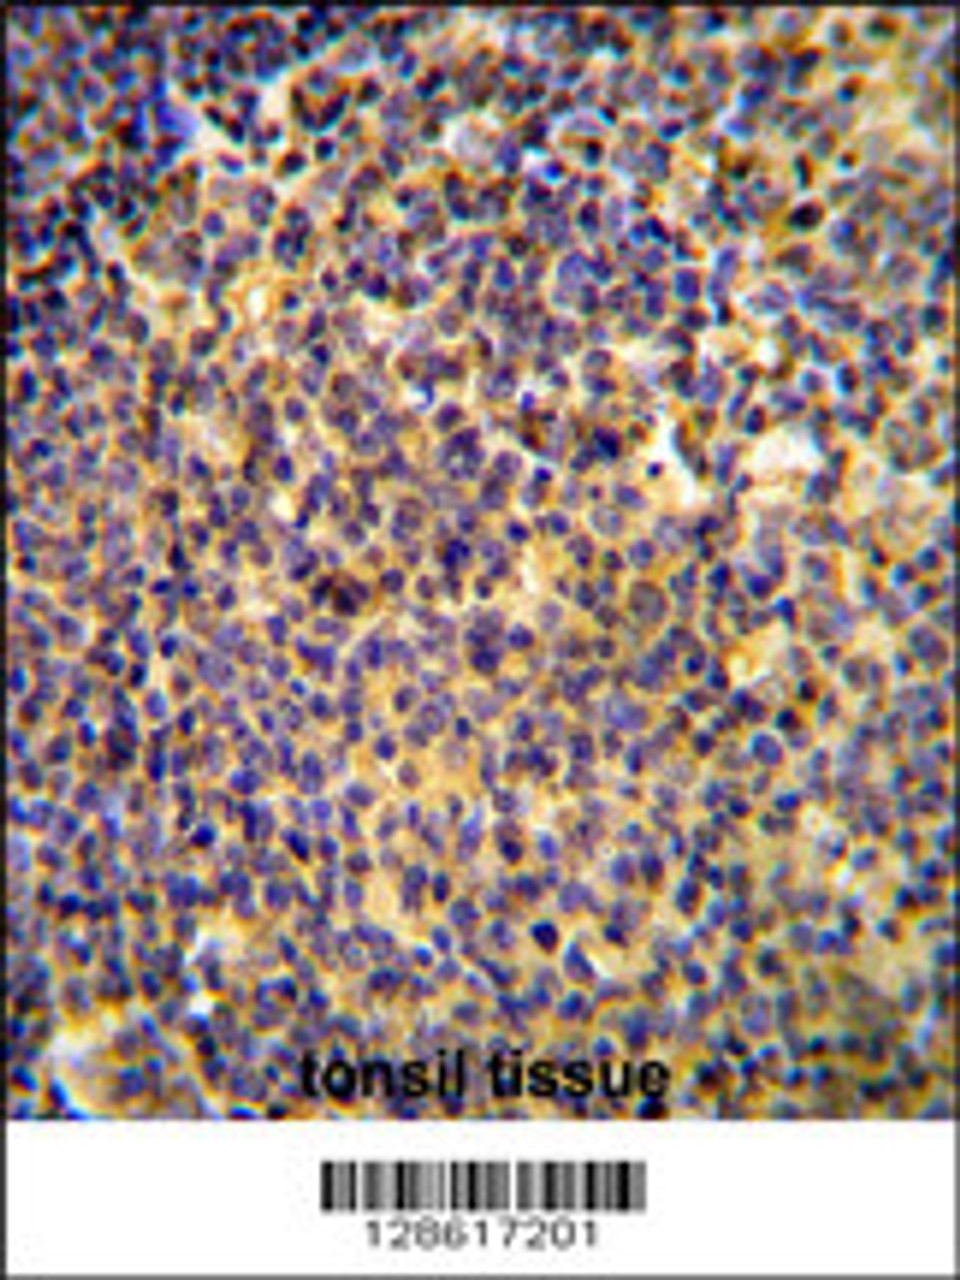 ANR44 Antibody immunohistochemistry analysis in formalin fixed and paraffin embedded human tonsil tissue followed by peroxidase conjugation of the secondary antibody and DAB staining.